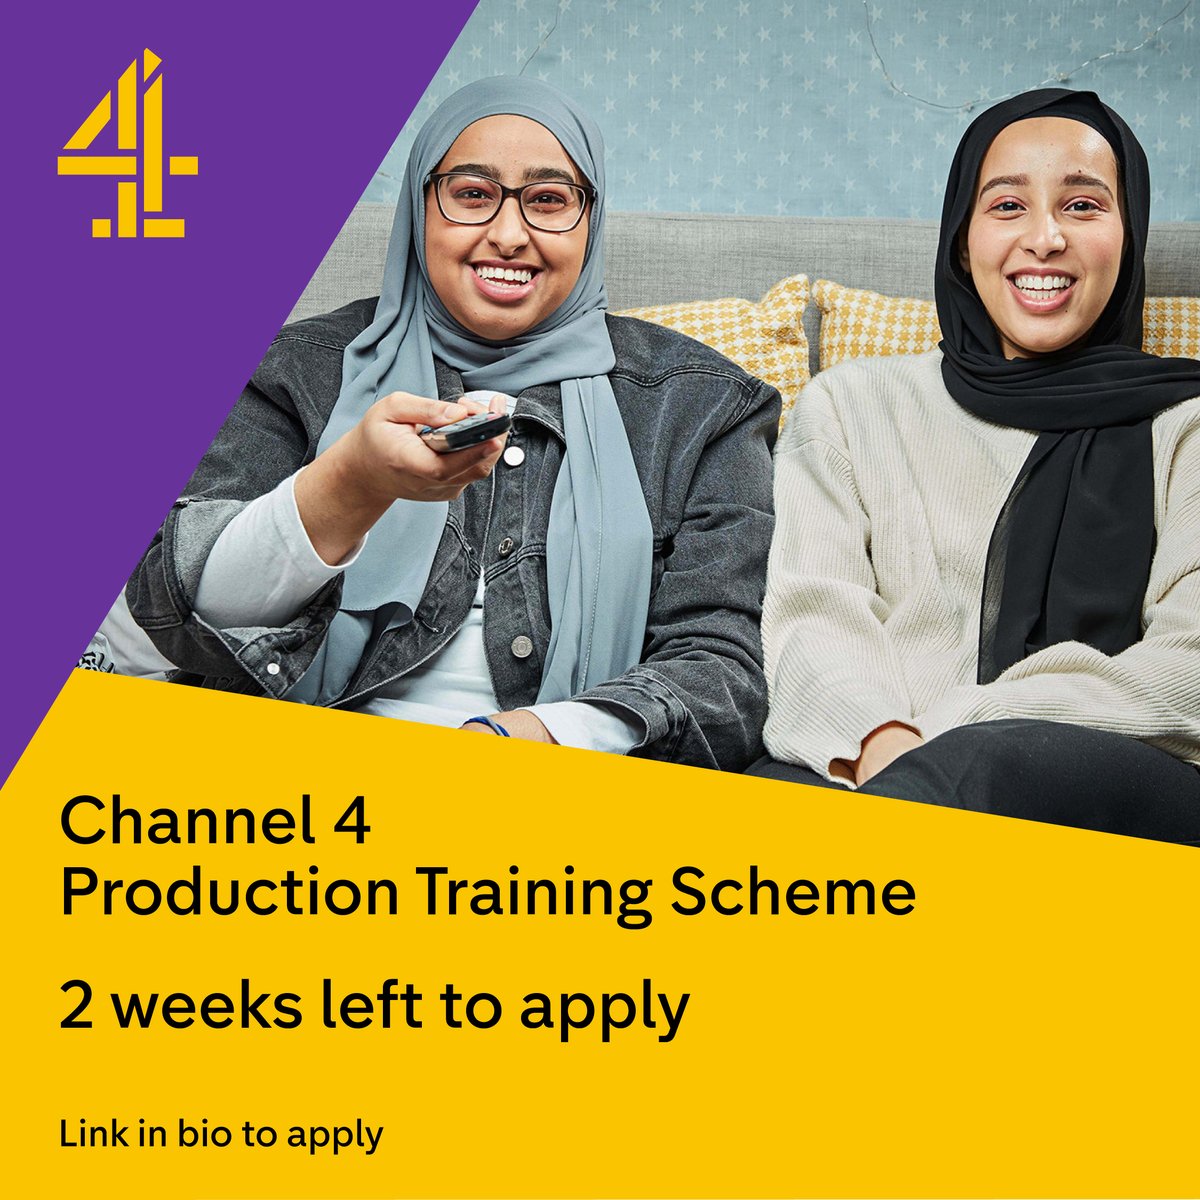 ⏰ You still have 2 WEEKS to apply for the Production Training Scheme! ⏰ ⌛ There’s plenty of time to complete your application and we have roles available in Belfast, Birmingham, Caernarfon, Cardiff, Glasgow, Leeds, Manchester, Middlesbrough and Wrexham. 👉Link in bio to apply!